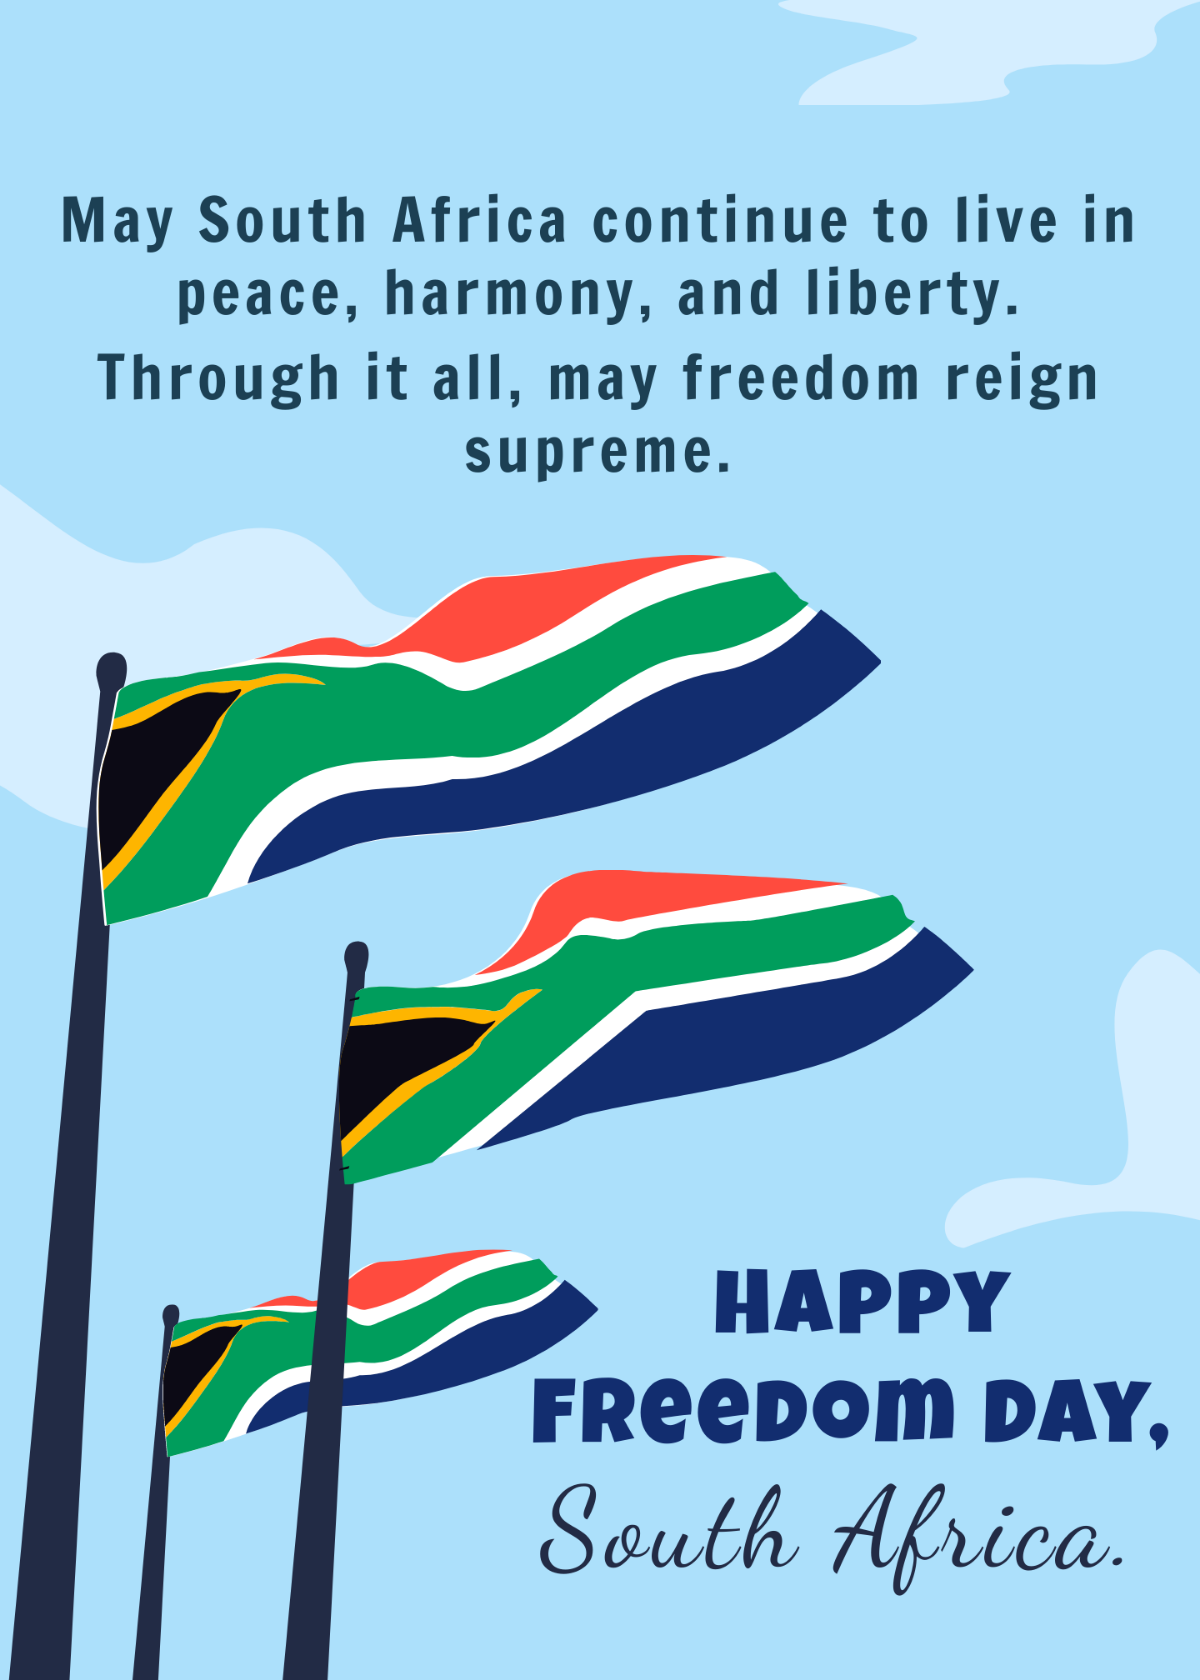 South Africa Freedom Day Wishes Template